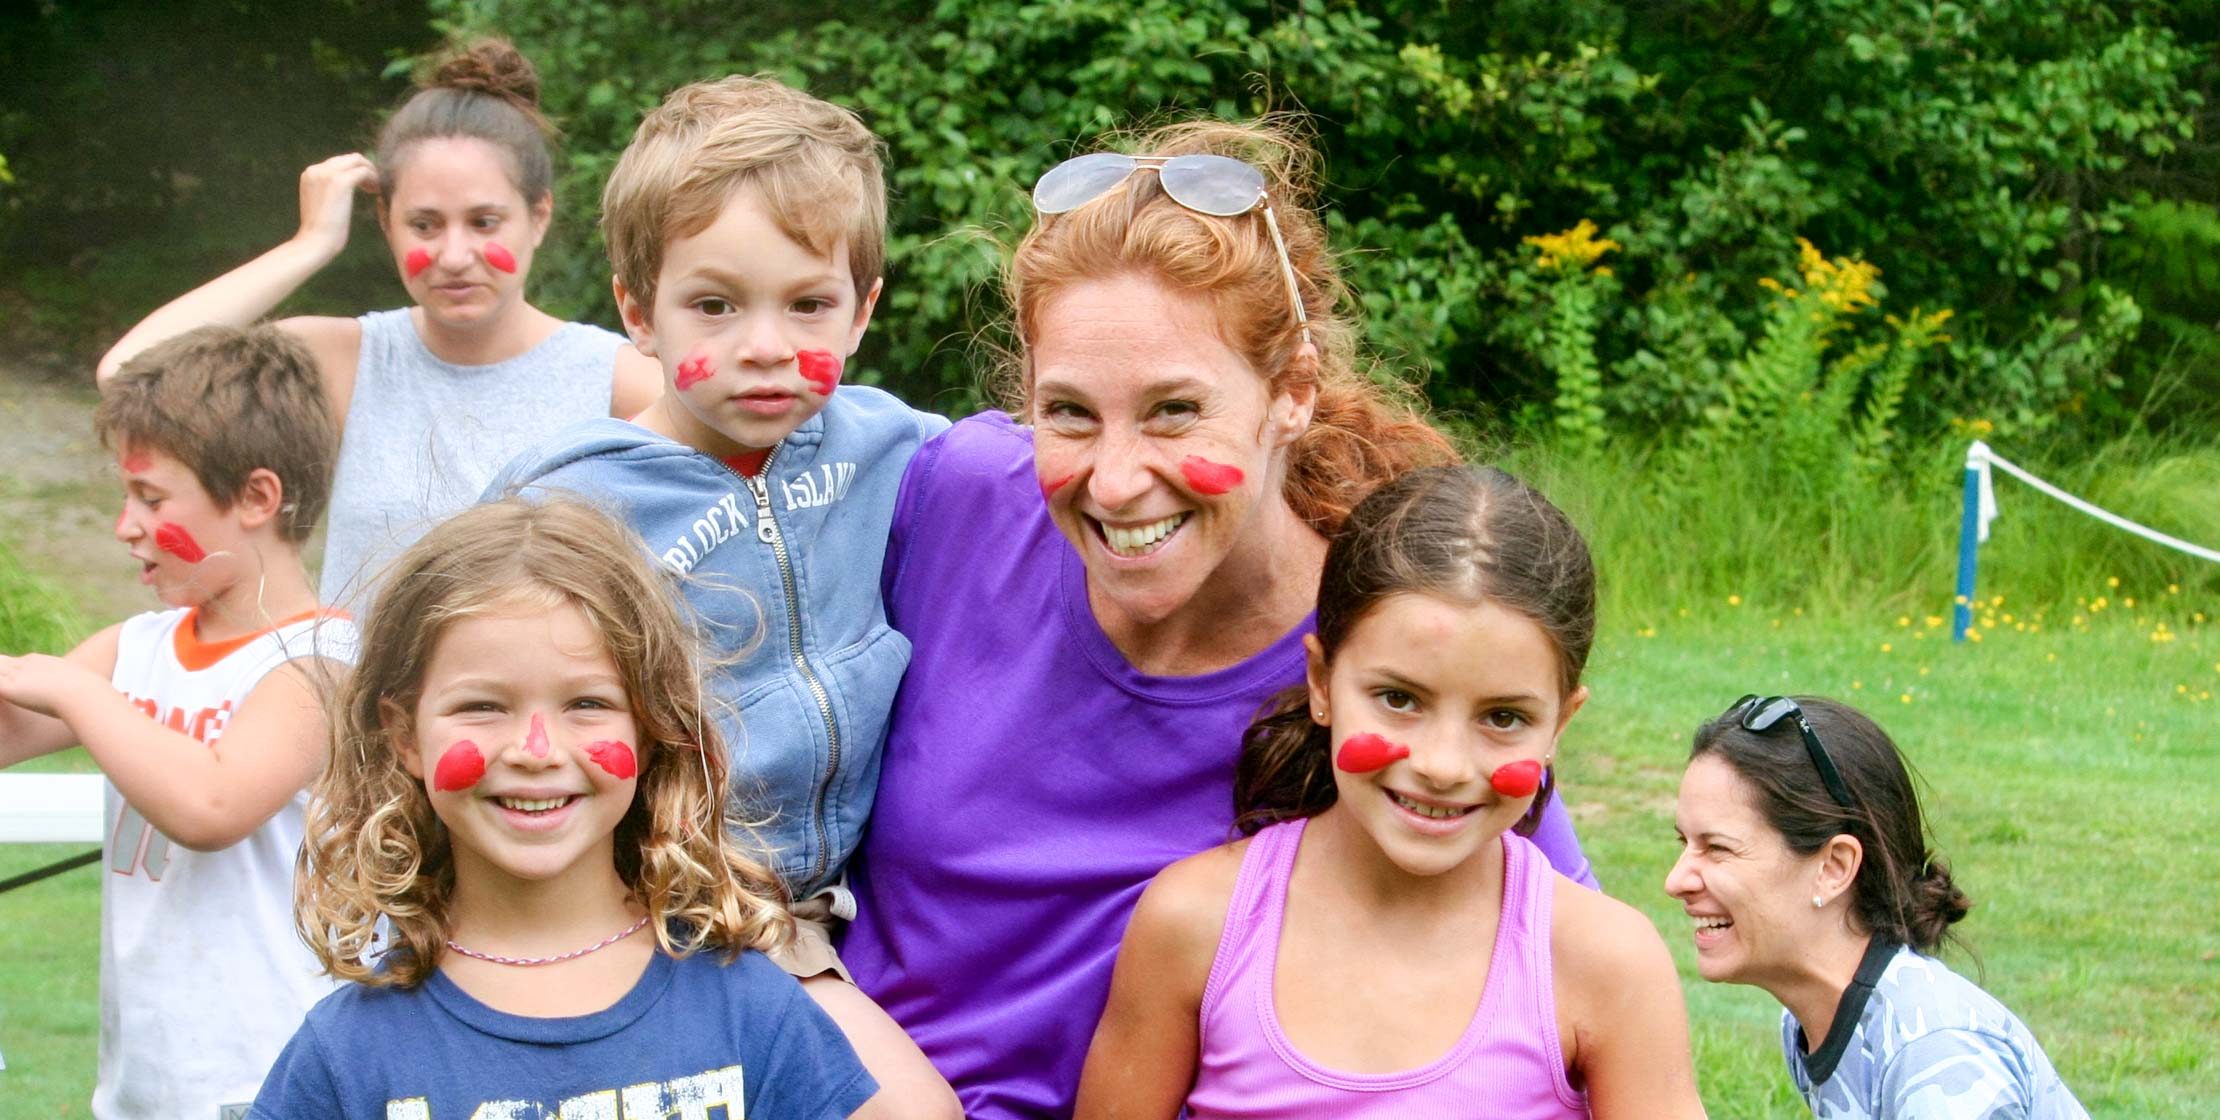 young campers and a red-headed woman with red paint on their faces